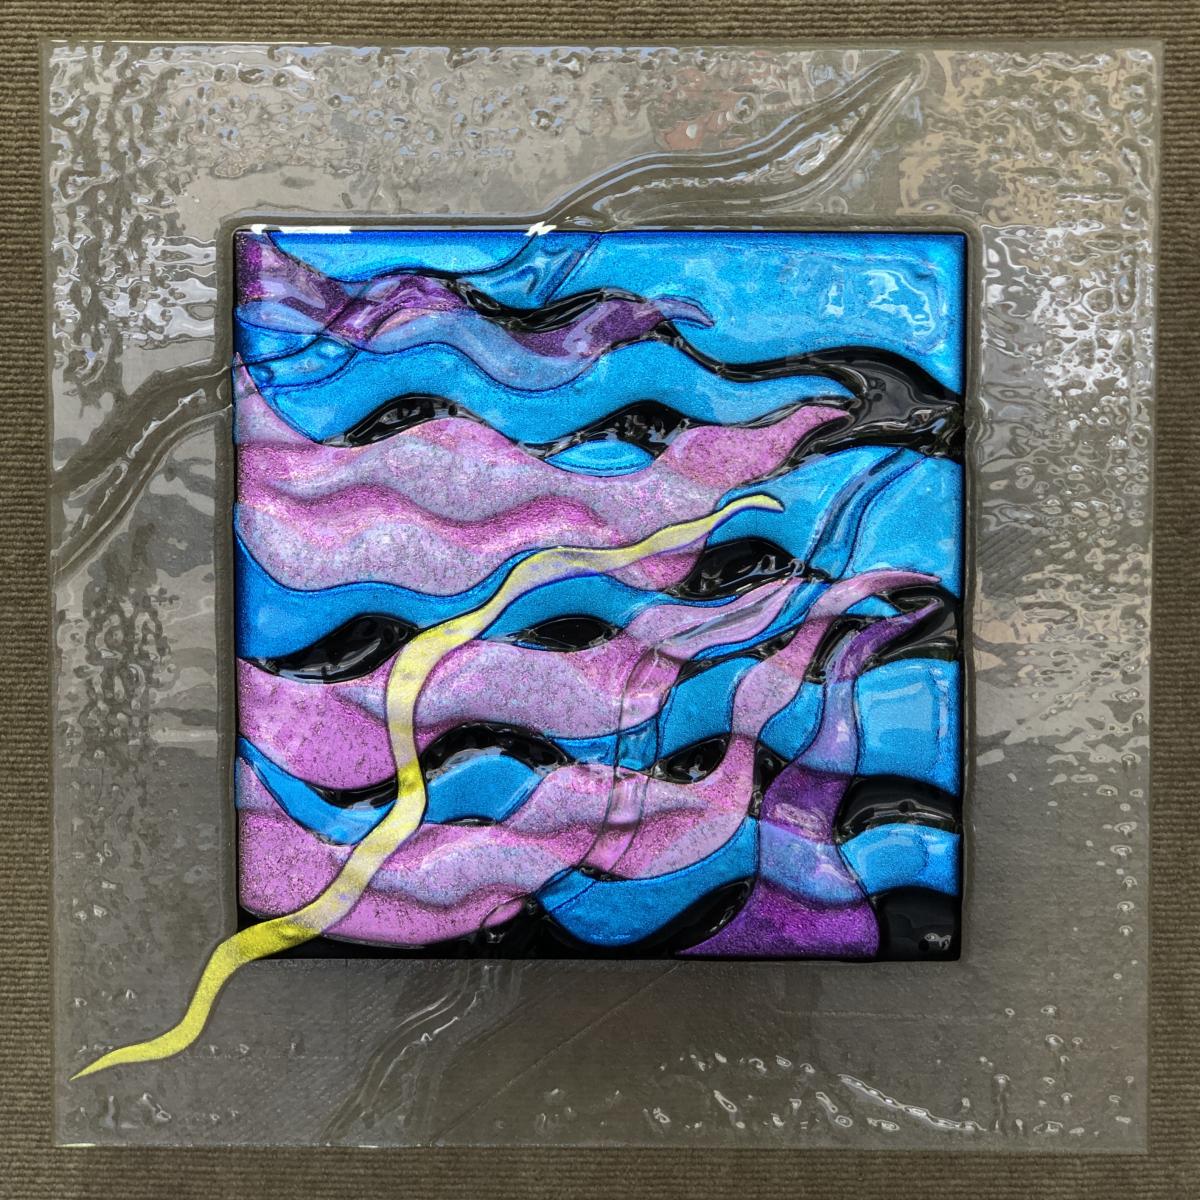 WATER MOODS
Kiln-fired glass
20x20x2
$1200 : Available Work : art & architectural glass for residential & commercial installations,purchase & commission